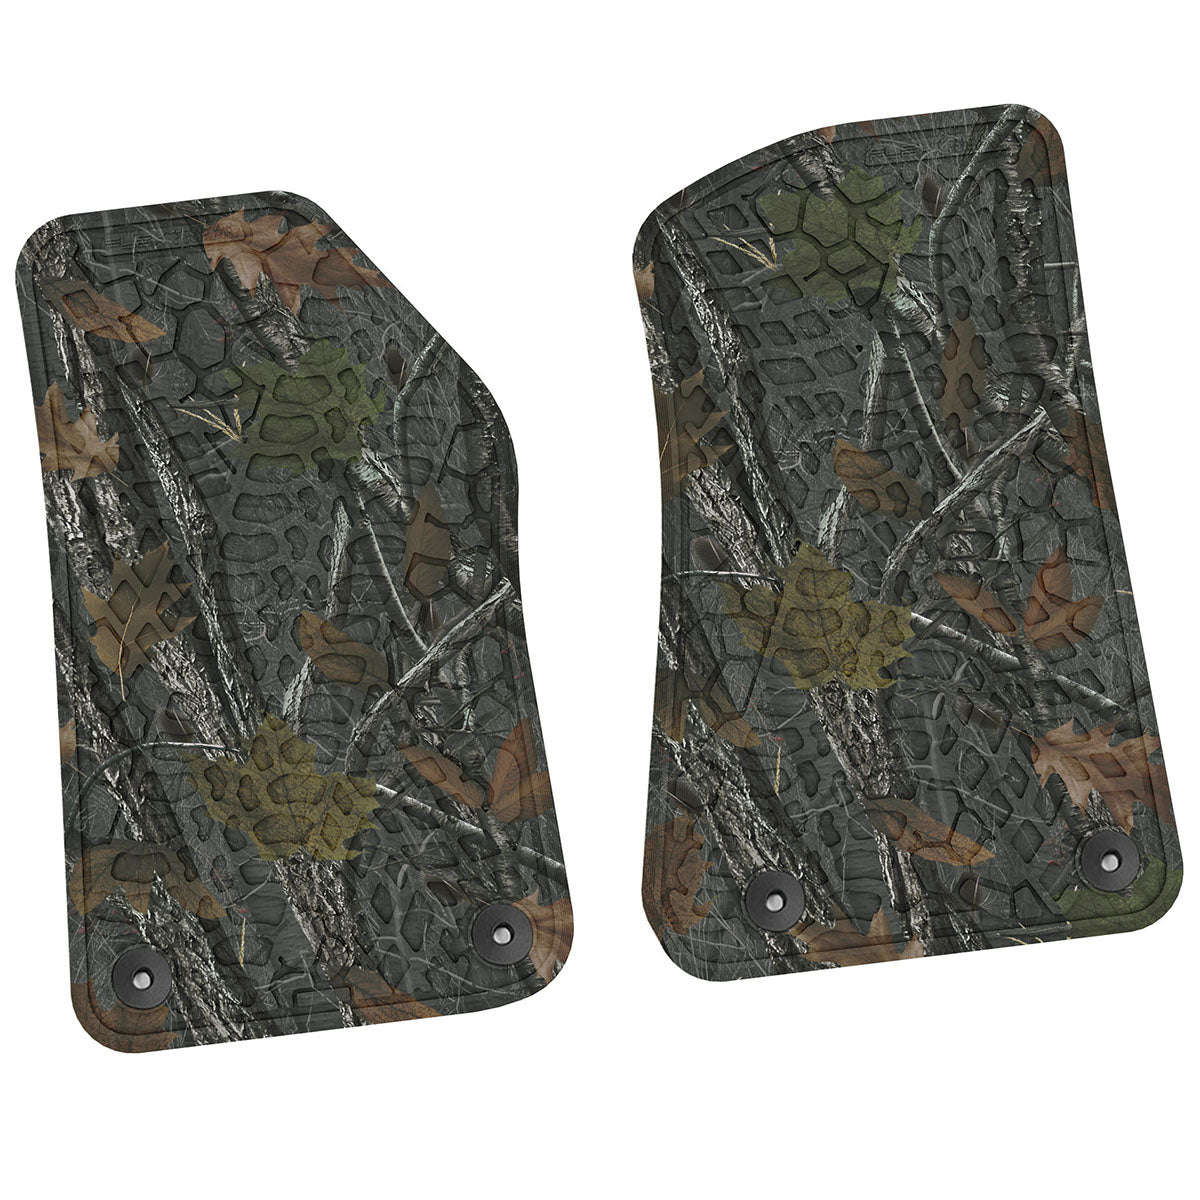 Jeep Floor Mats 18-24 Jeep Wrangler JL 2 Dr/Gladiator 2 Piece Tire Tread/Scorched Earth Scene - Rugged Woods FlexTread